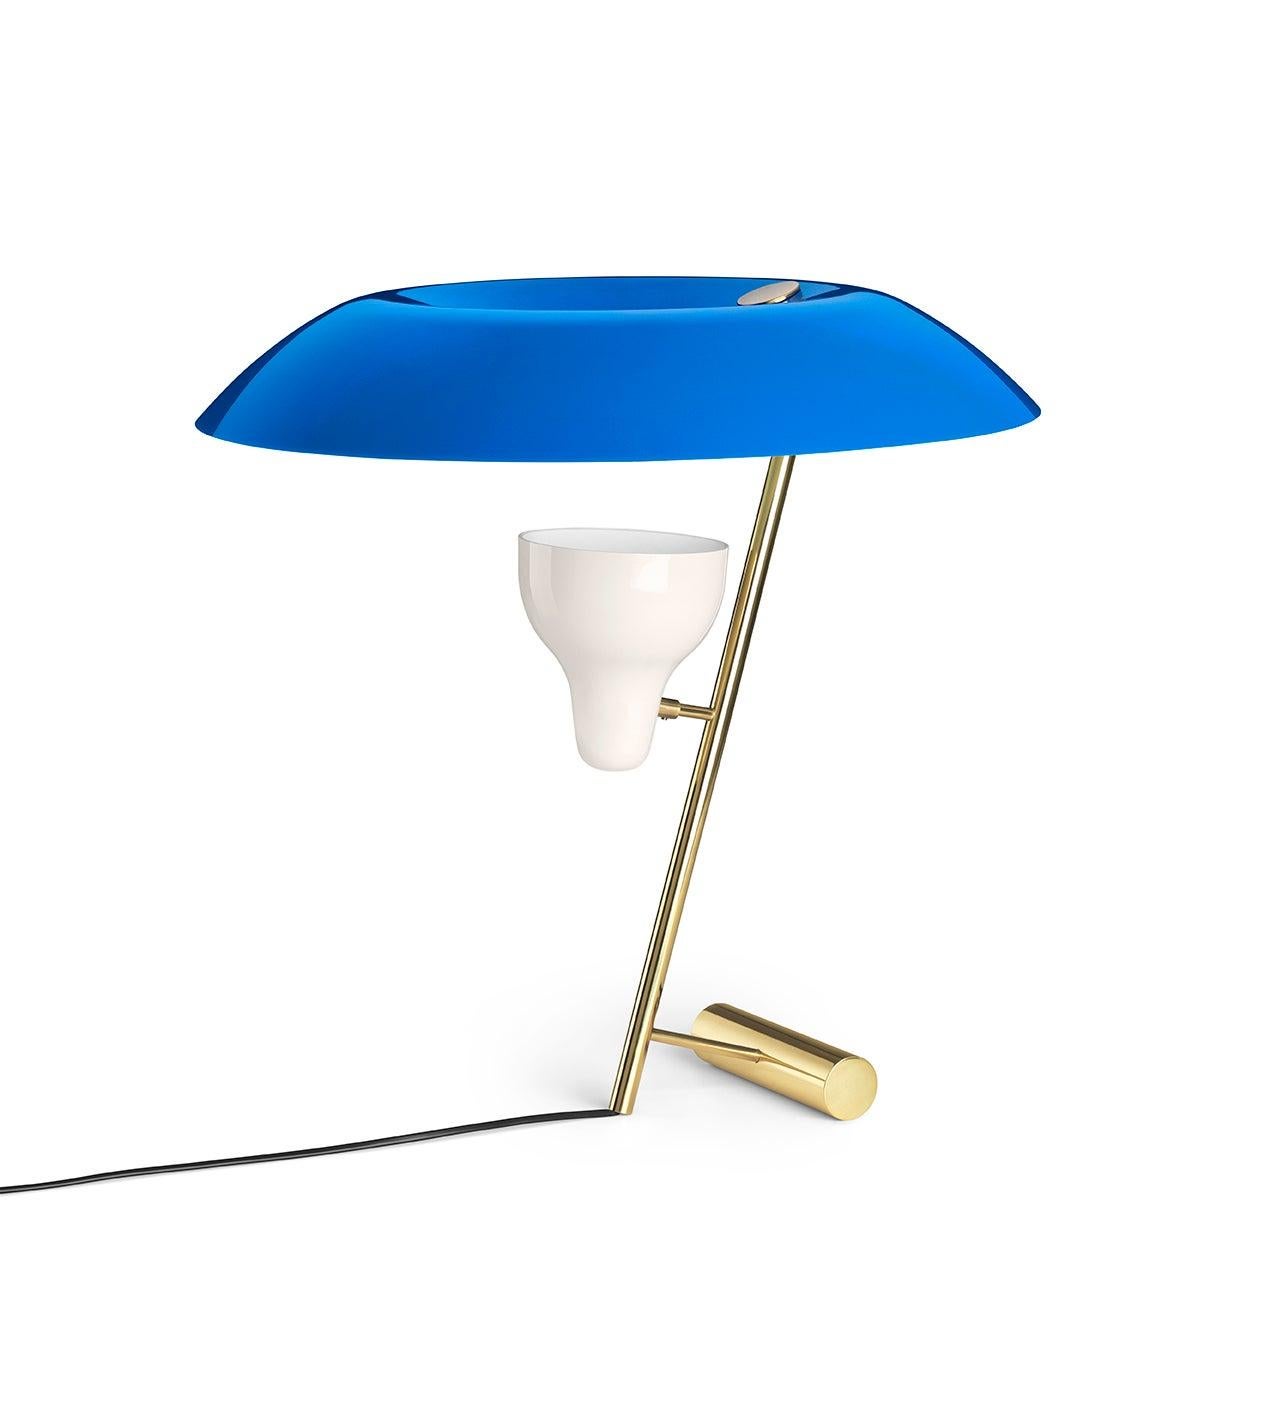 Gino Sarfatti Lamp Model 548 Polished Brass with Blue Difuser by Astep 2